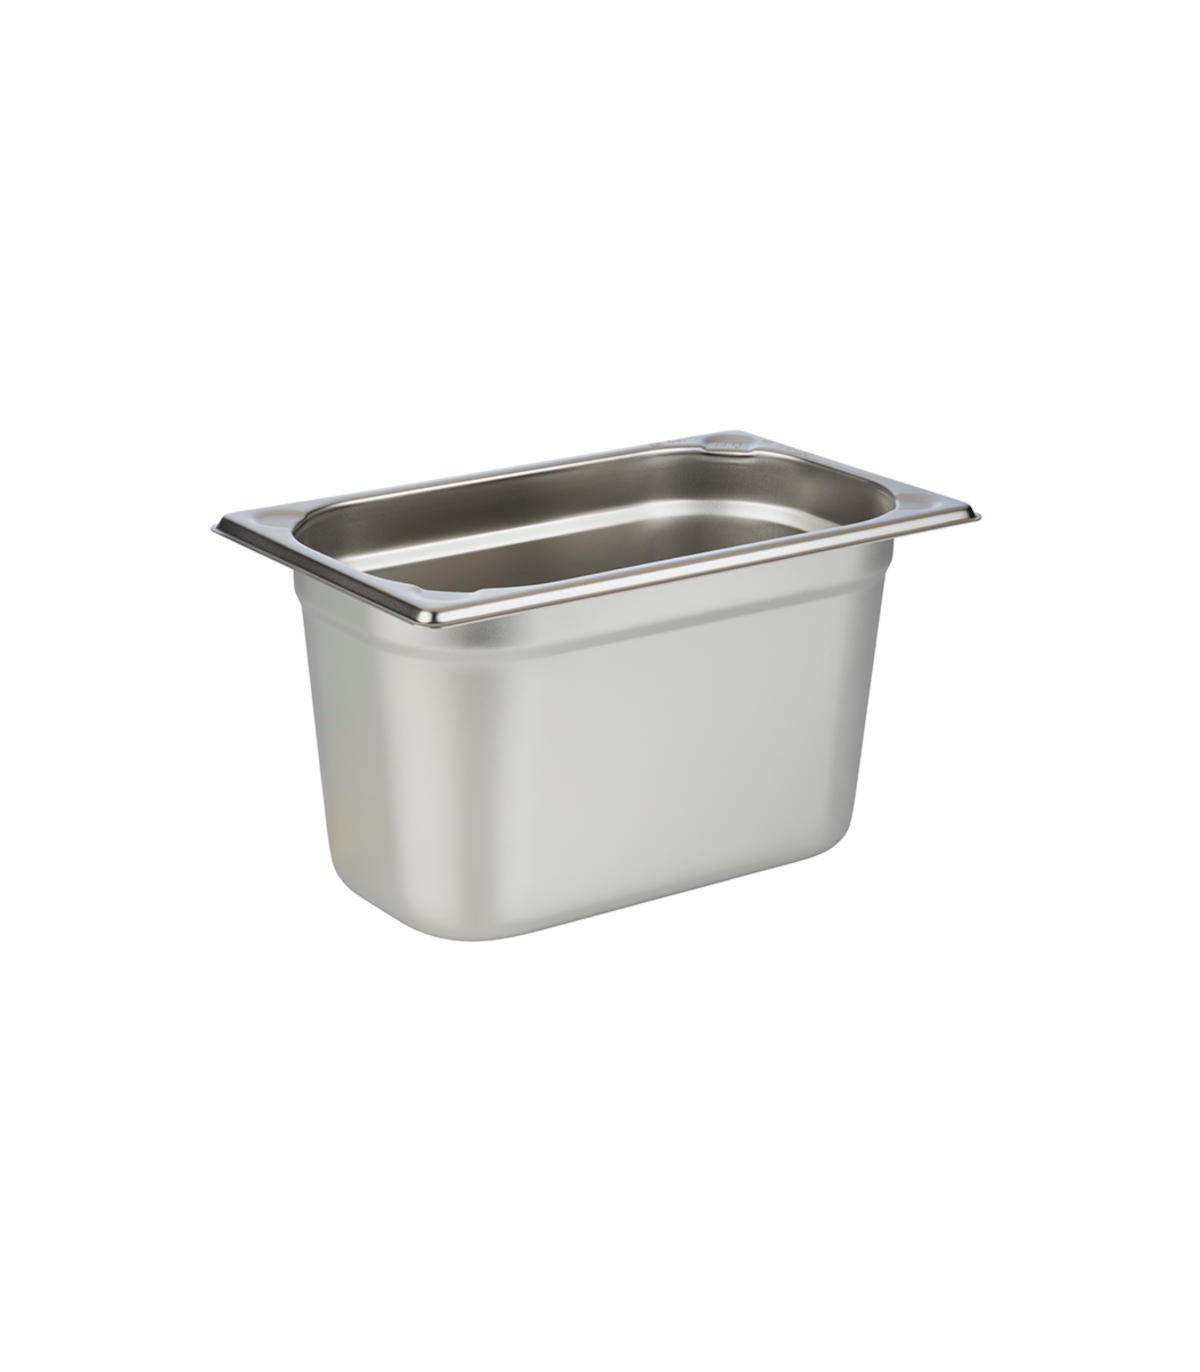 GN container 1/4 H 15 cm stainless steel : Stellinox